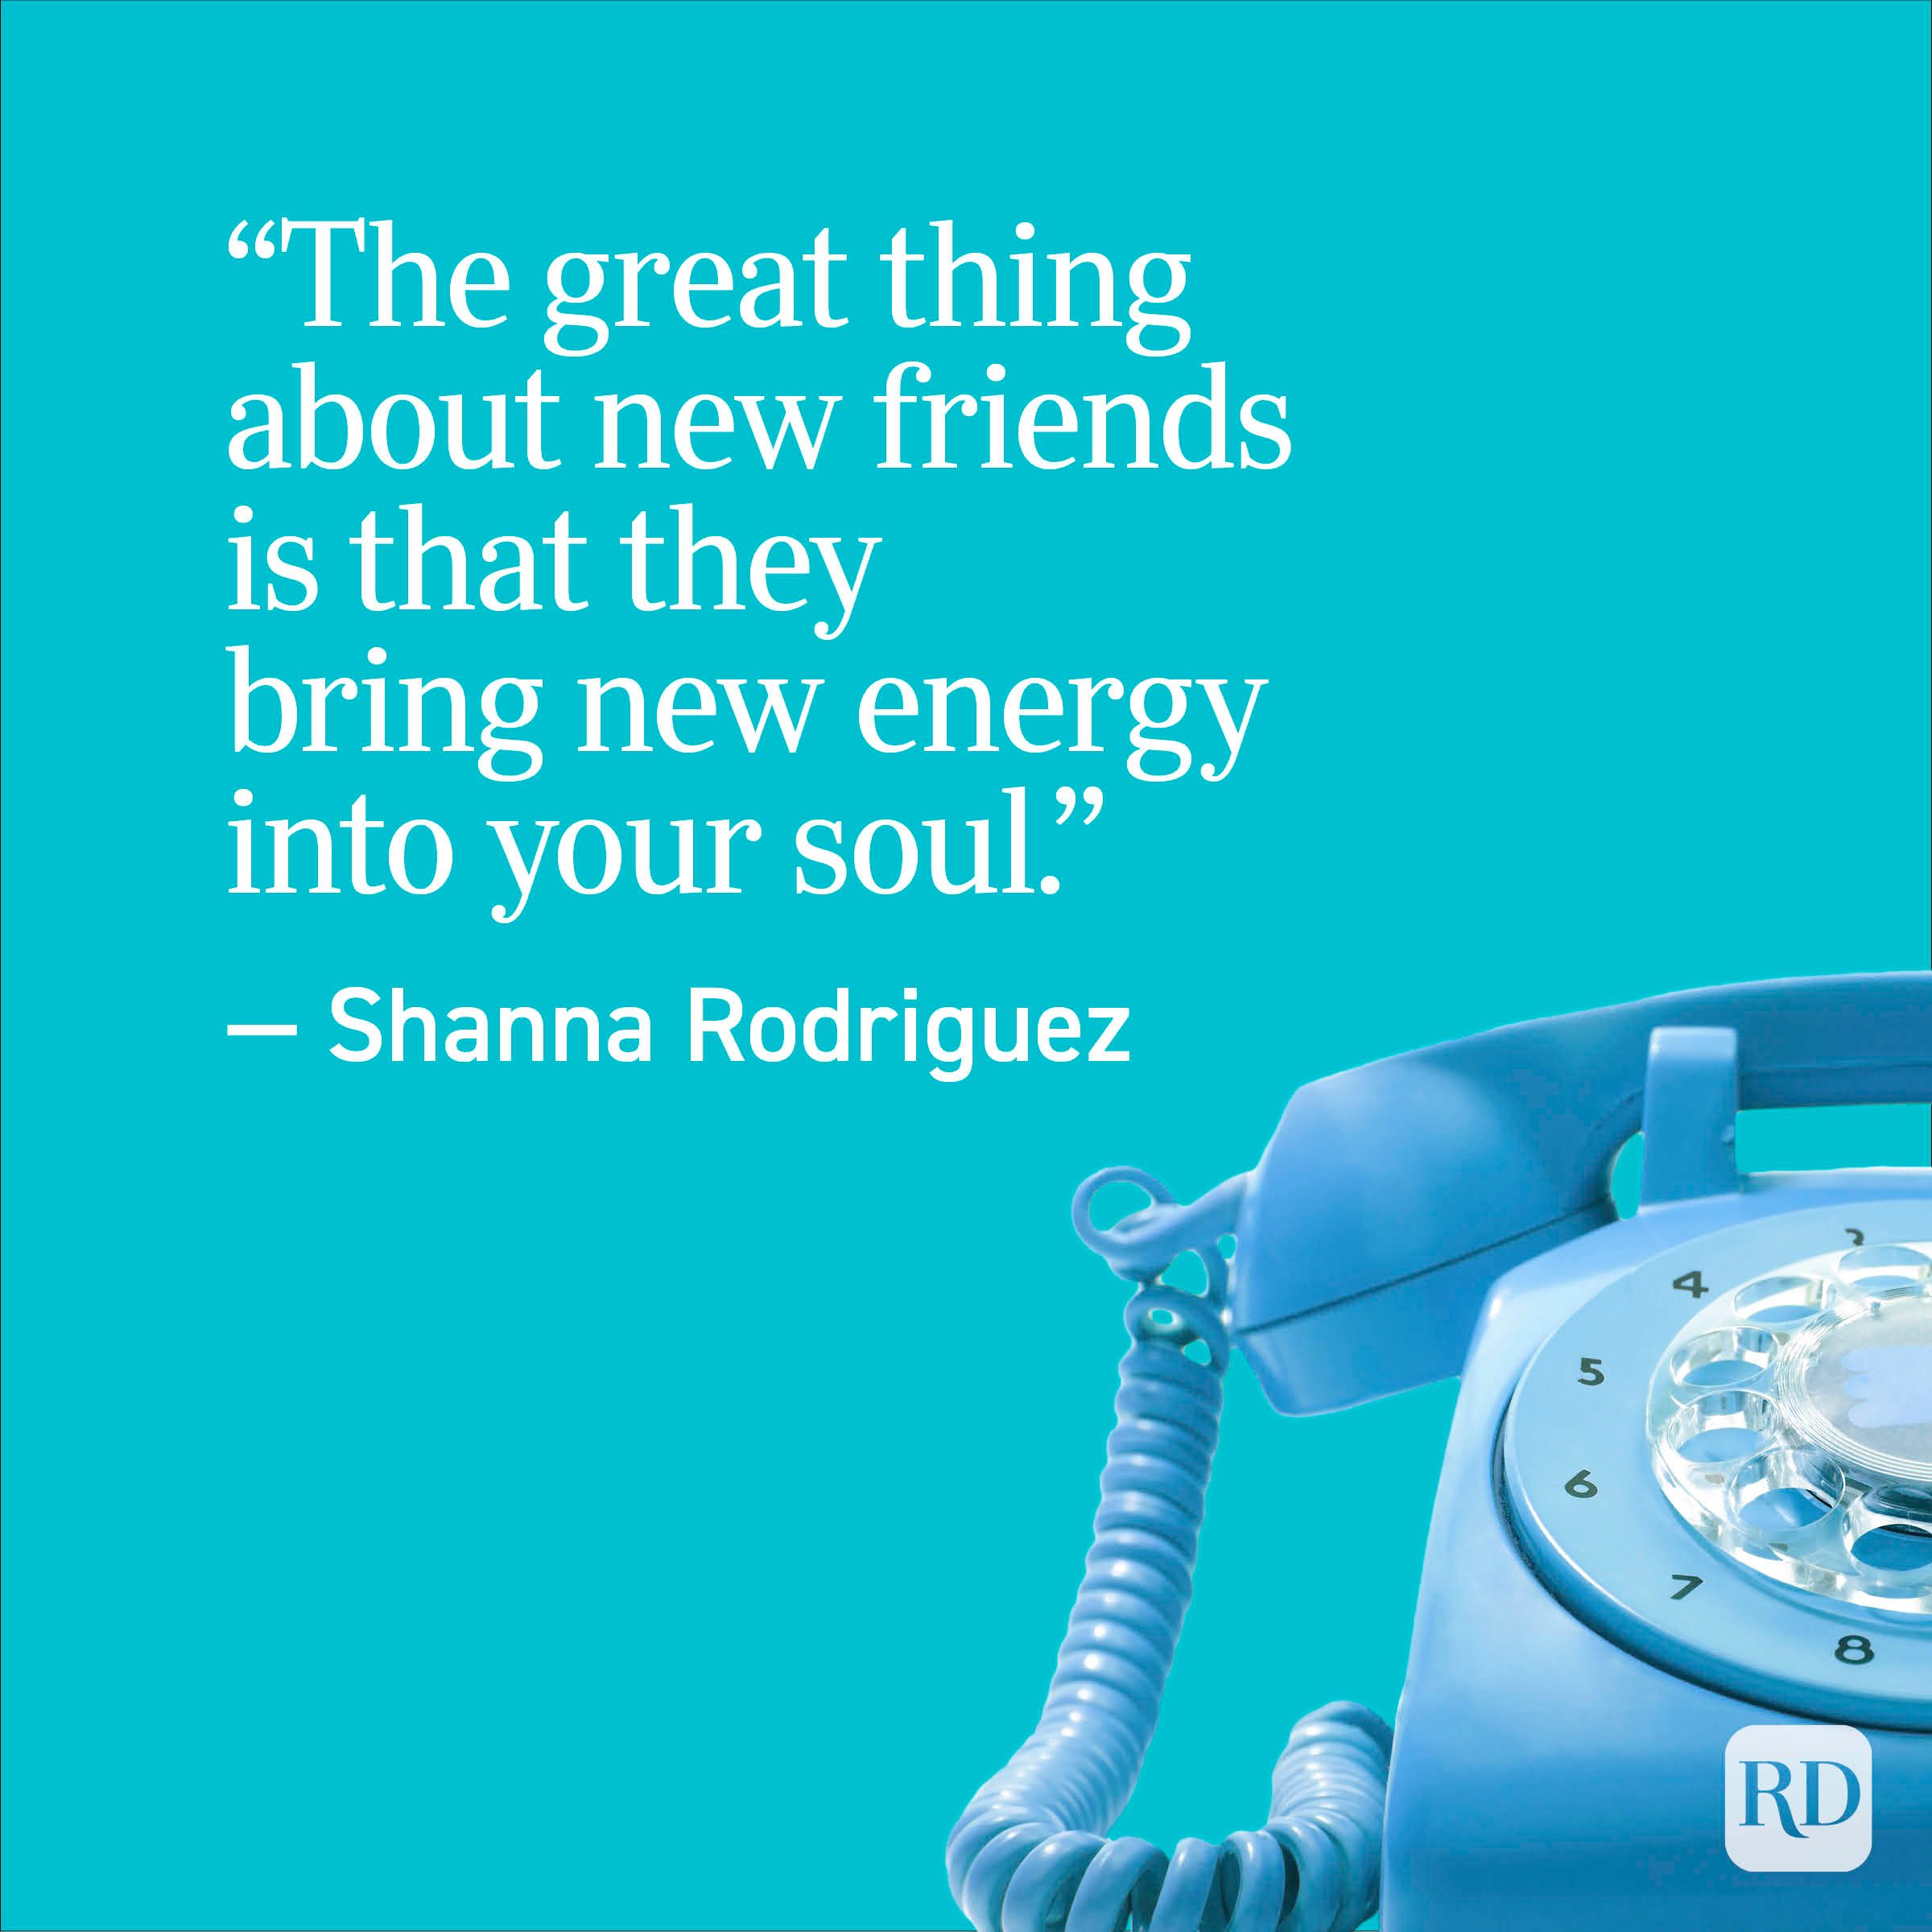 "The great thing about new friends is that they bring new energy into your soul." - Shanna Rodriguez